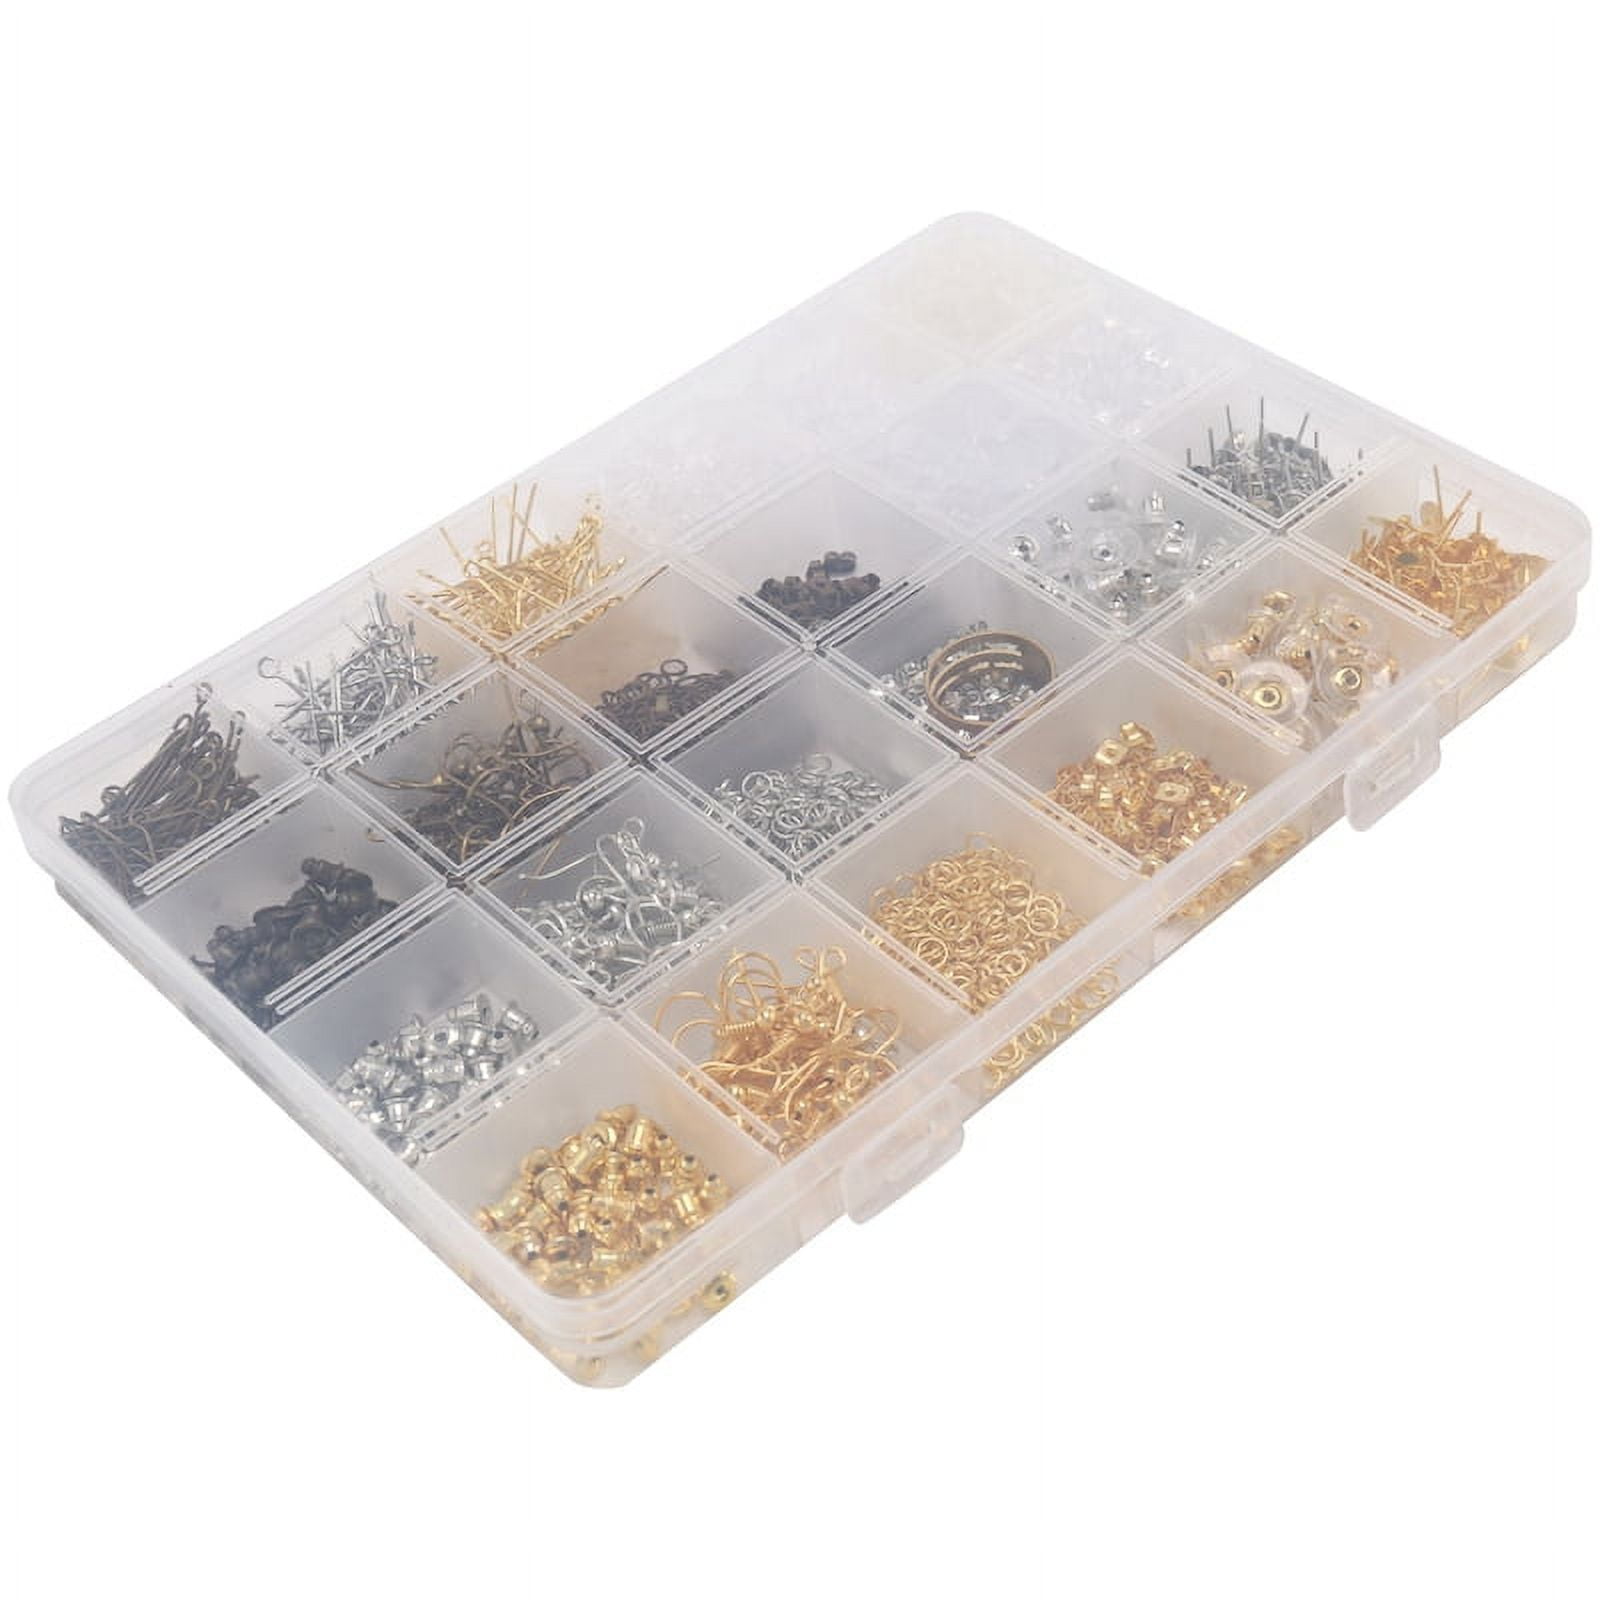 Earring Making Kit, 2450Pcs Earring Making Supplies Kit with Earring Hooks,  Earring Posts and Backs, Jump Rings for Jewelry Making